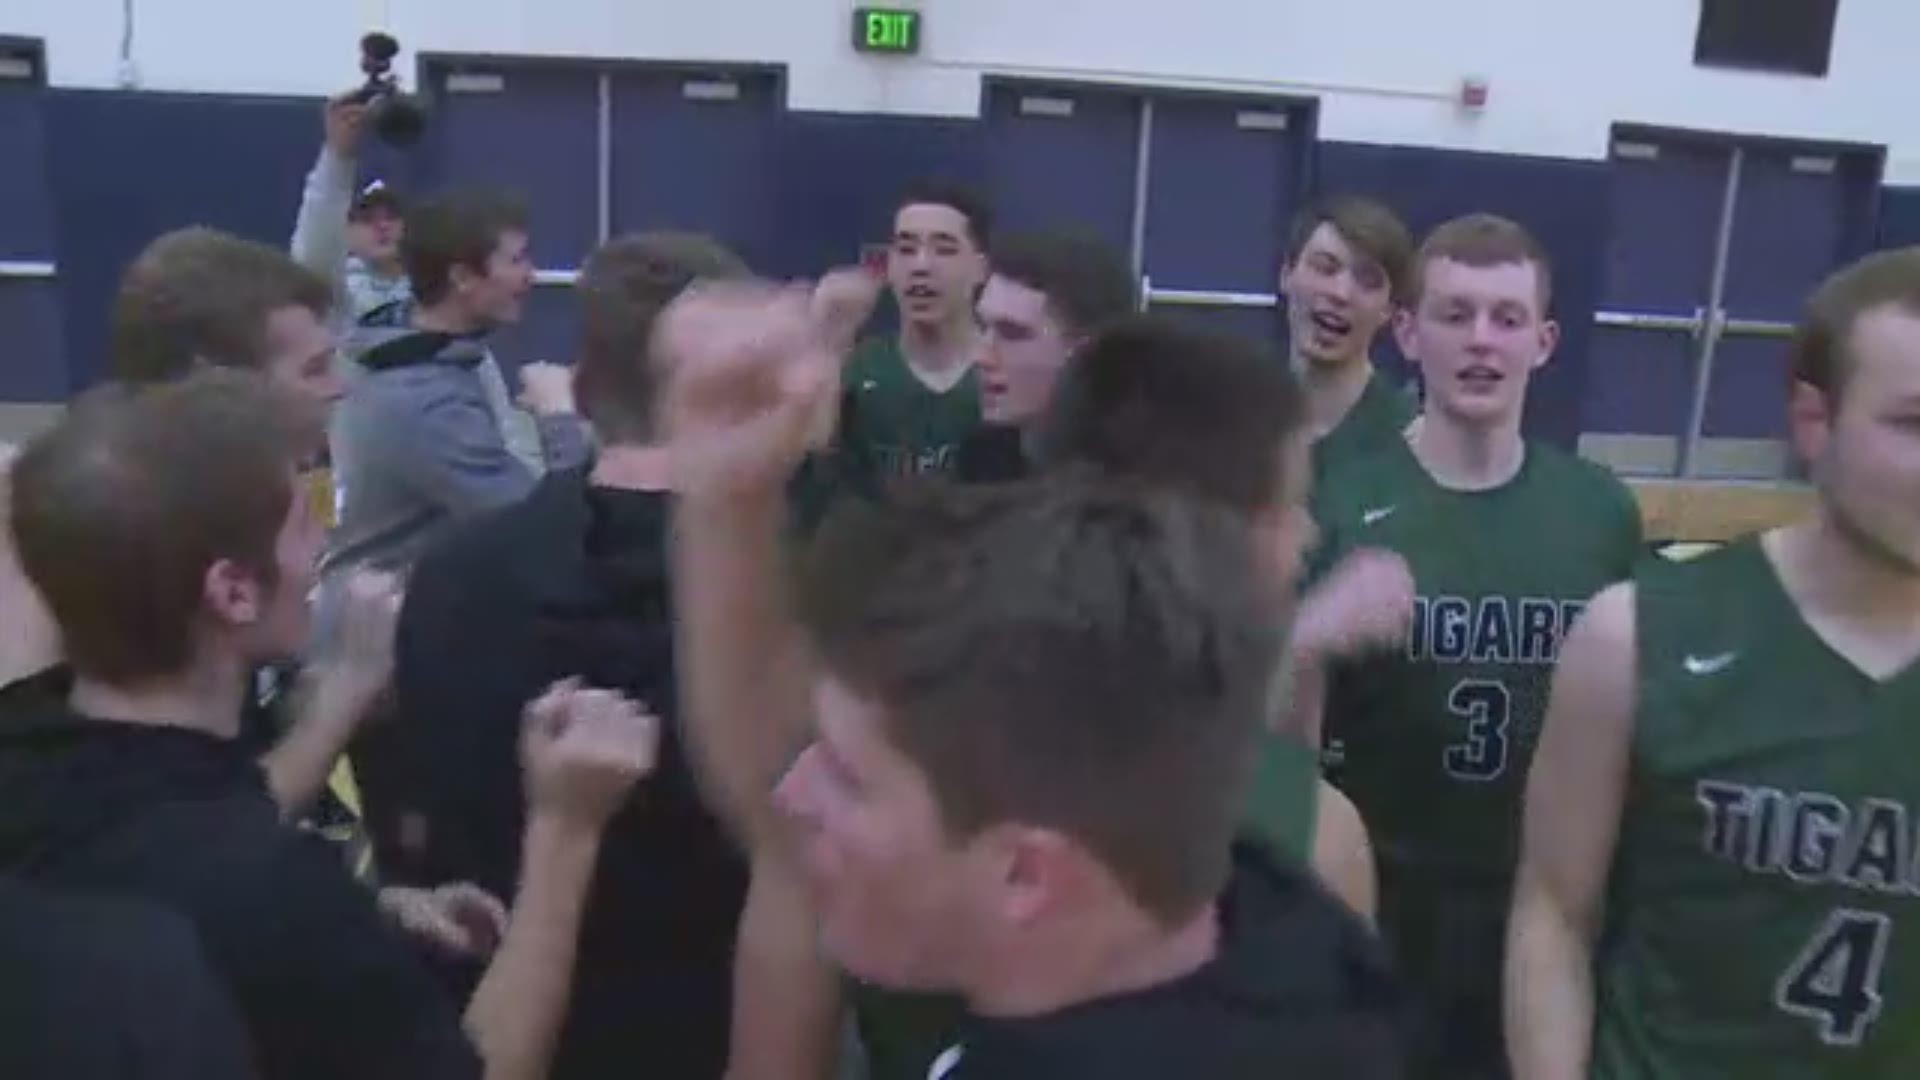 Highlights of the Tigard Tigers 2019 boys basketball team. Highlights were part of KGW’s Friday Night Hoops coverage. #KGWPreps